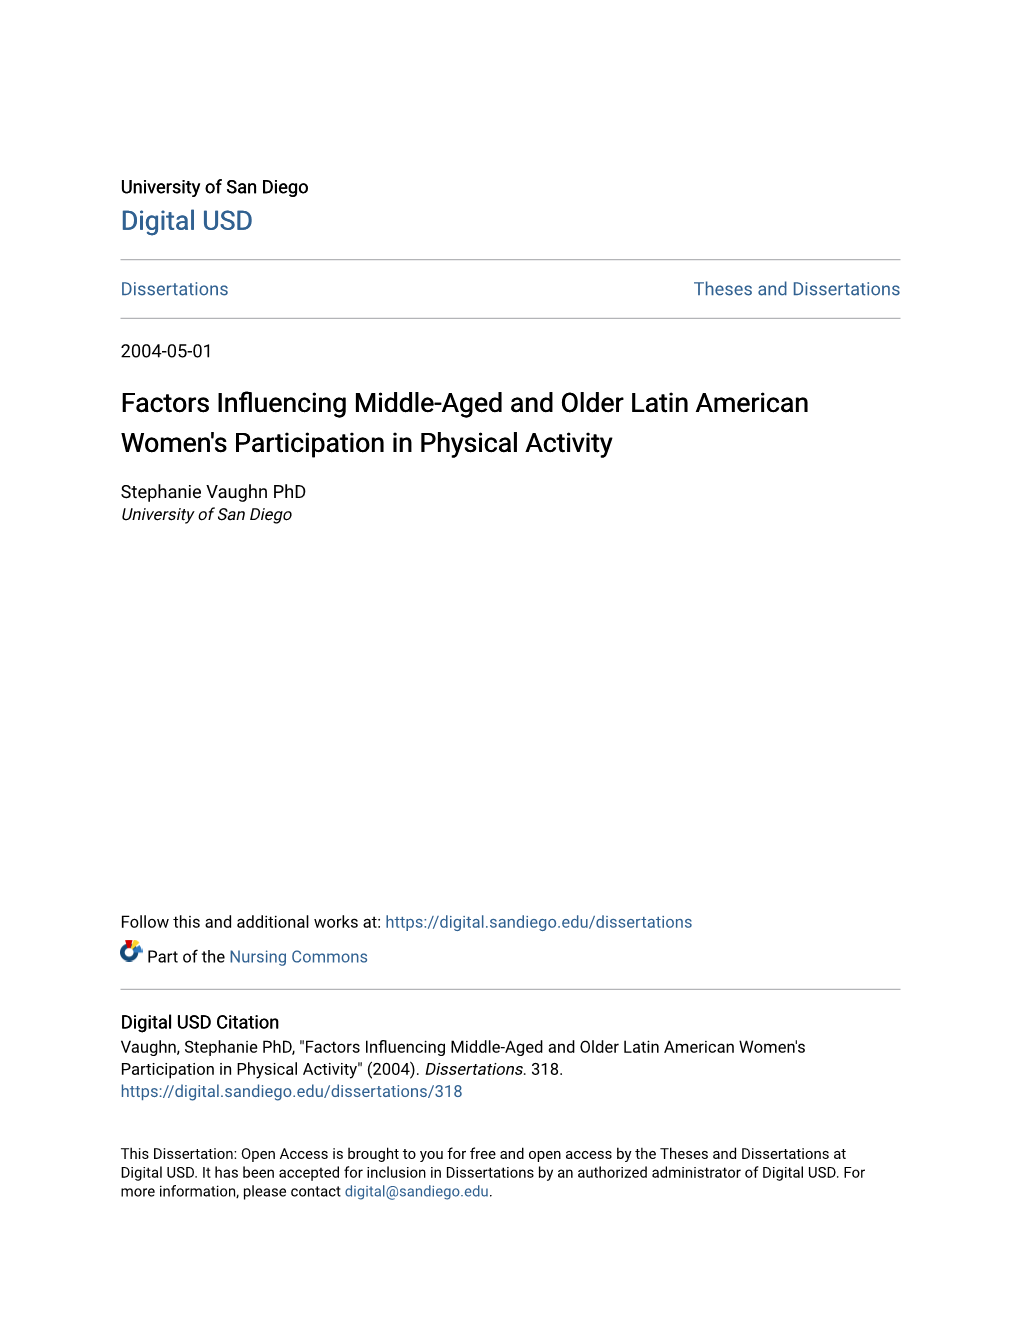 Factors Influencing Middle-Aged and Older Latin American Women's Participation in Physical Activity